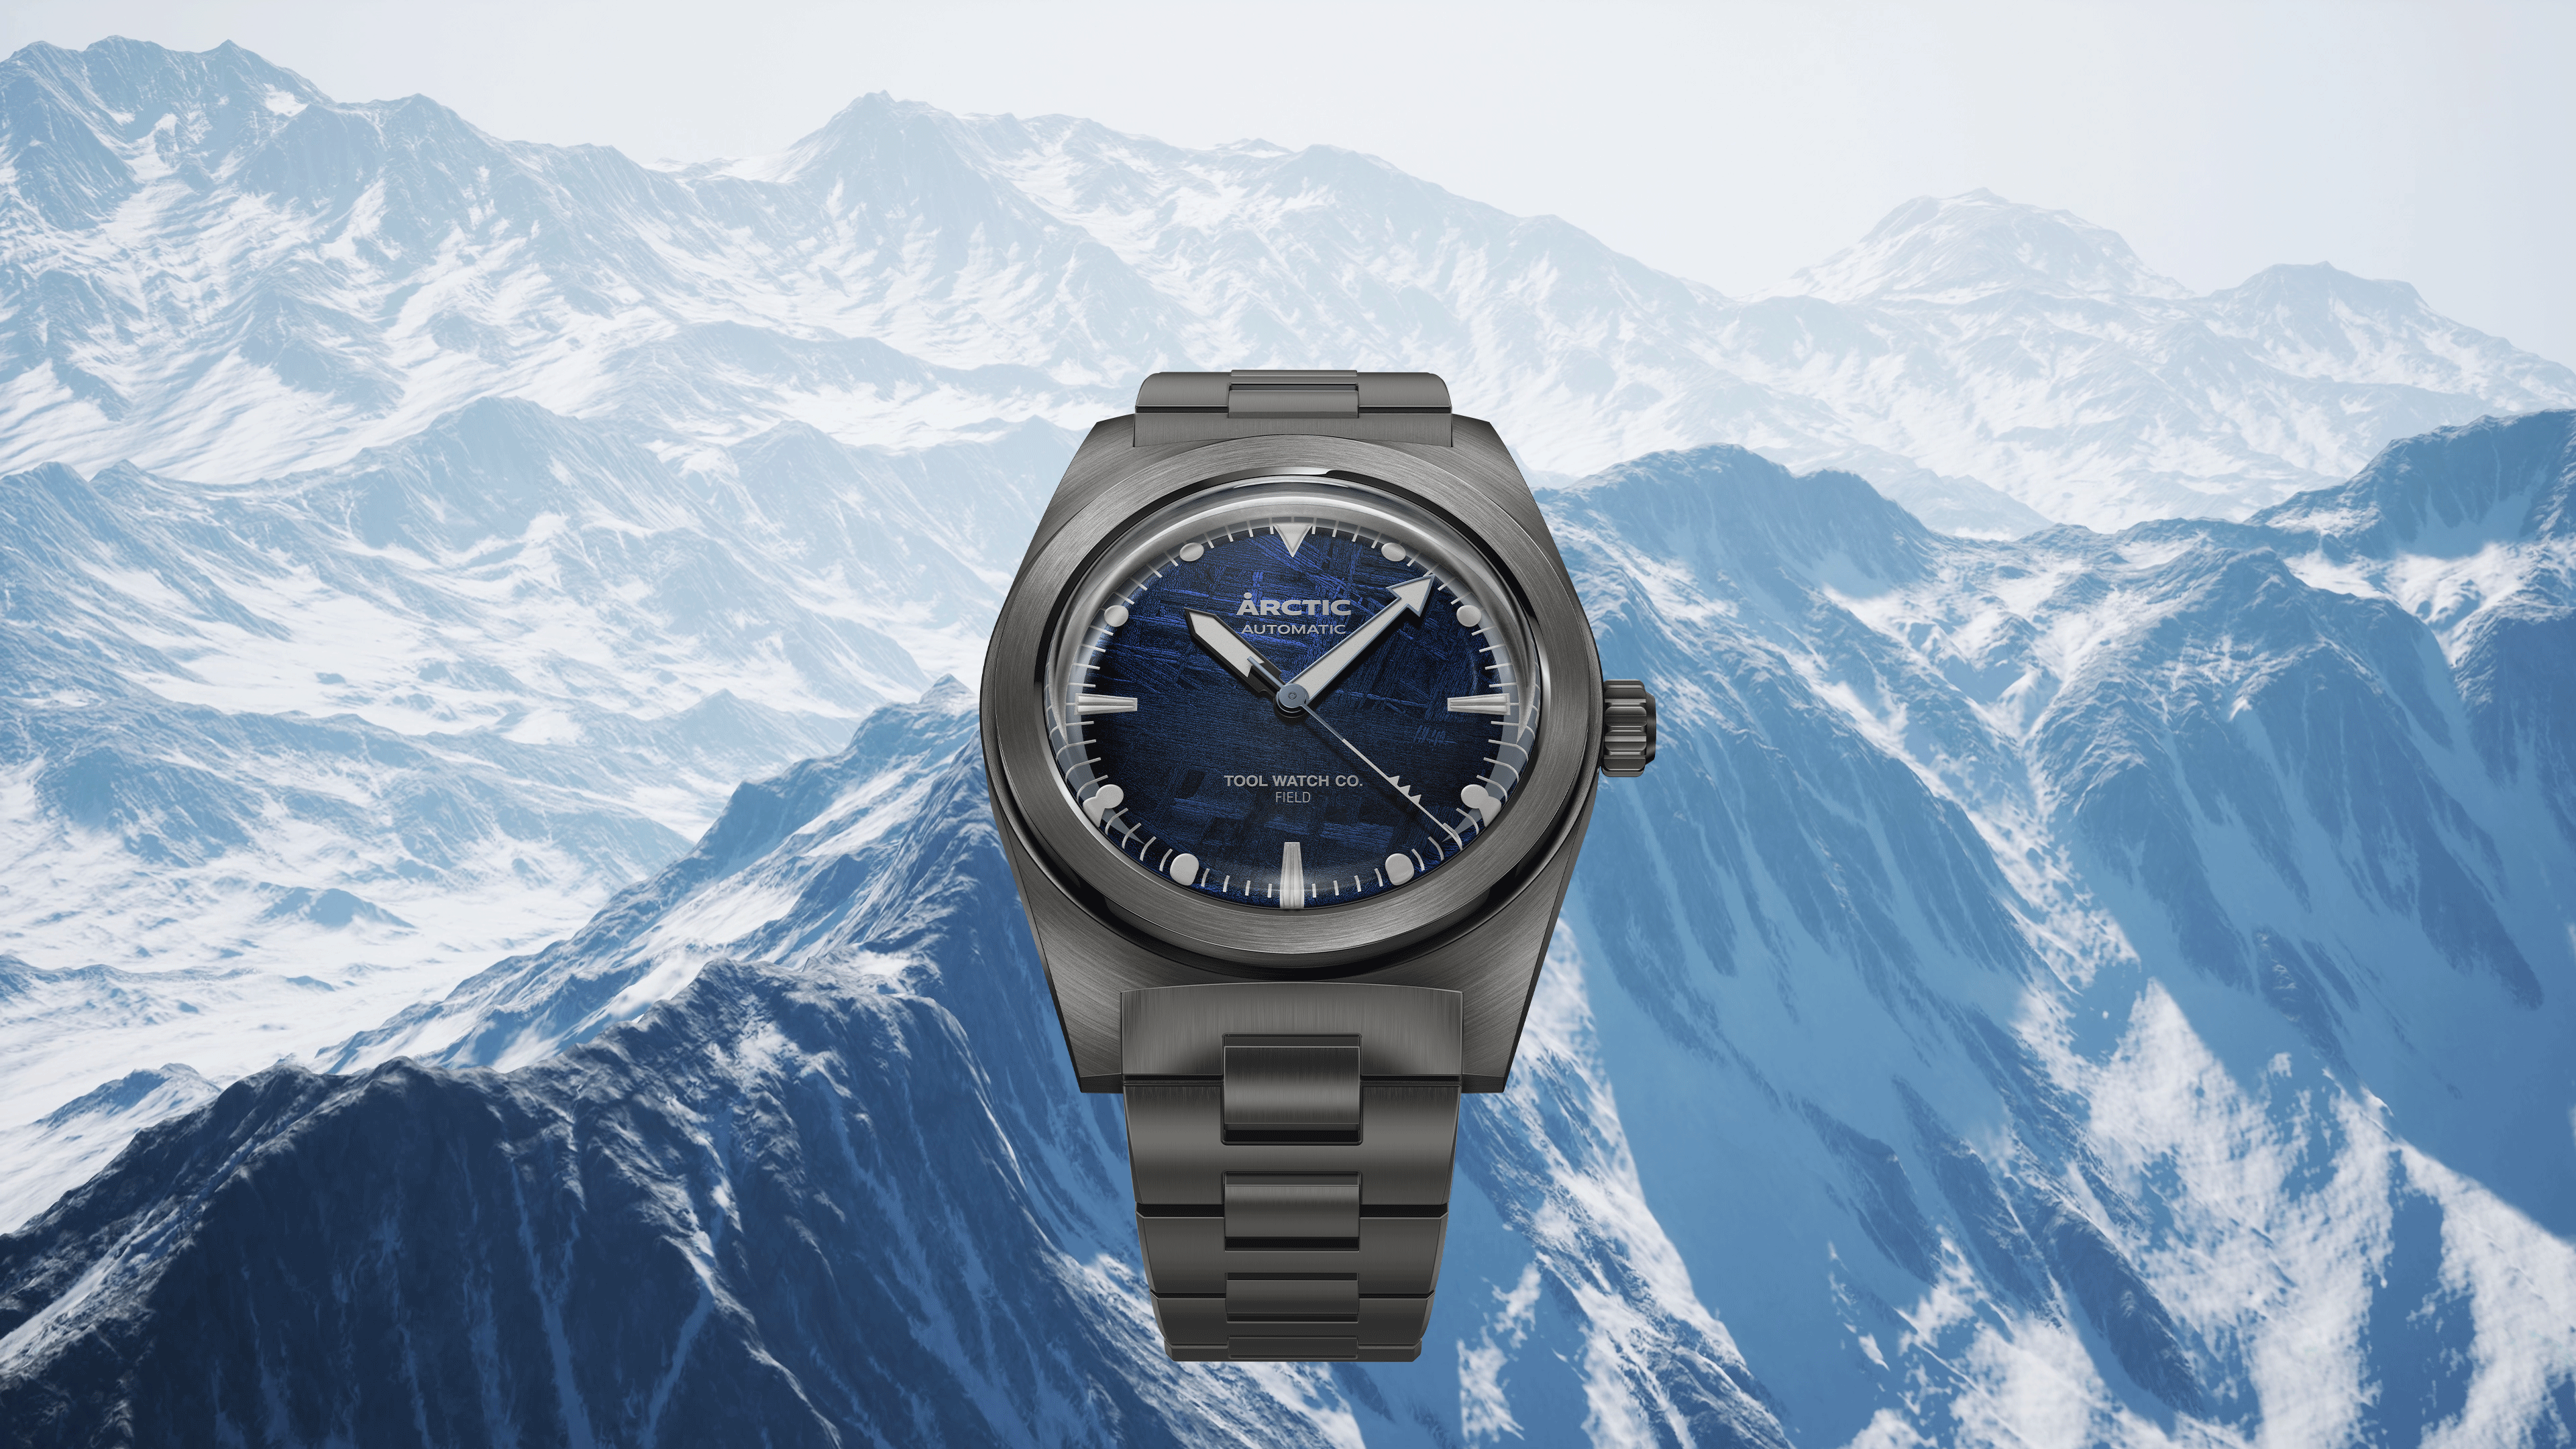 Tool Watch Co. goes polar with The Arctic Explorer Signature Series